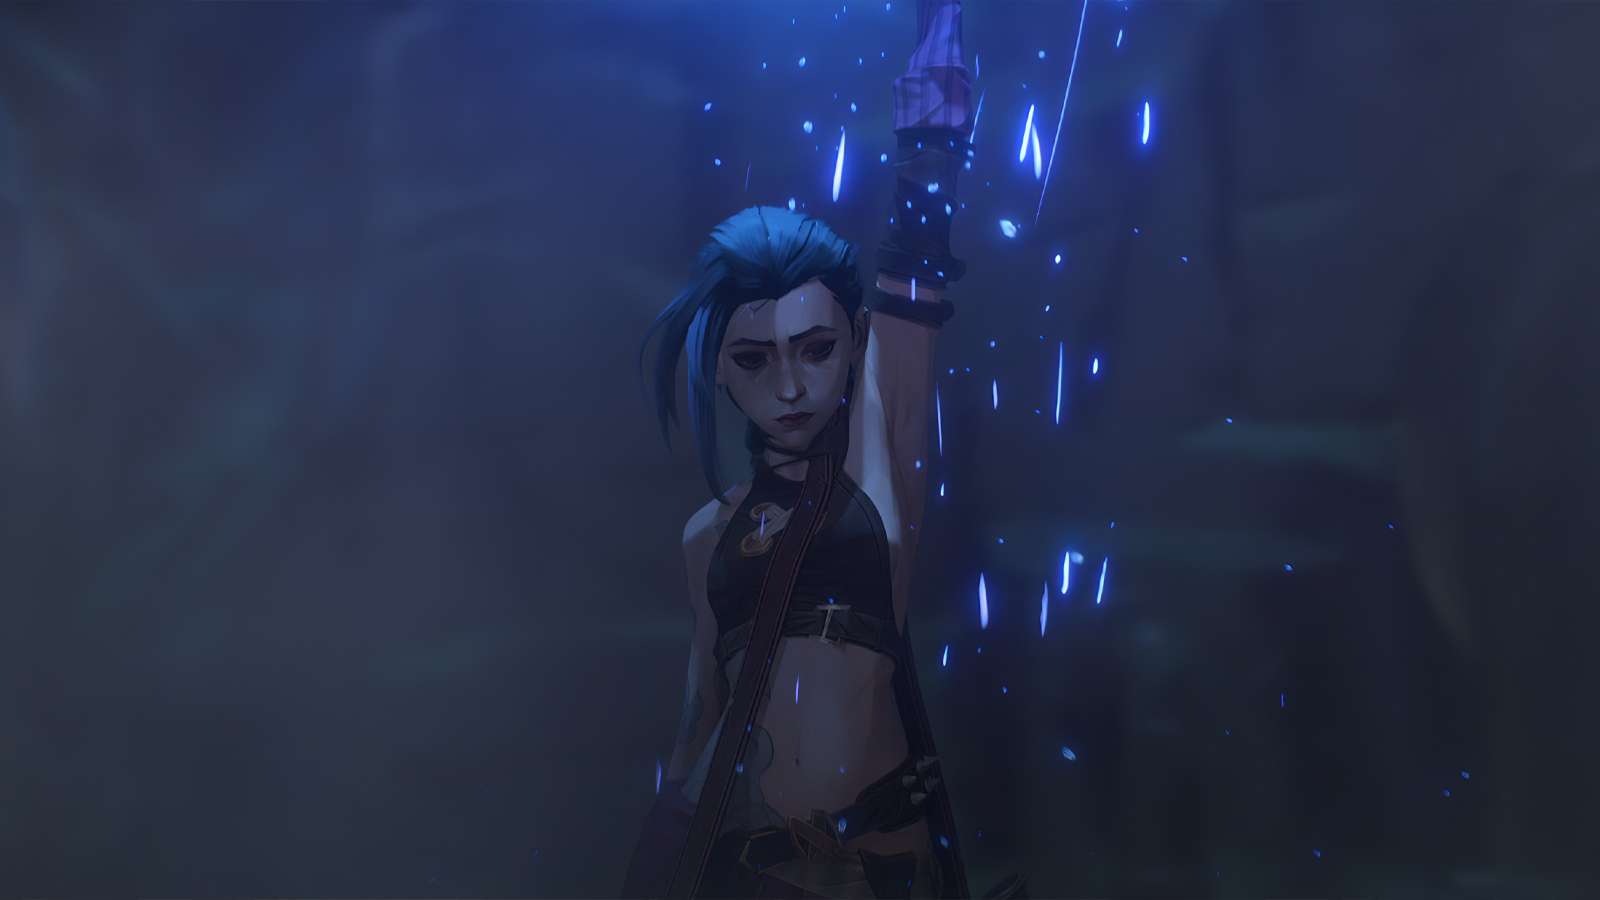 jinx holding up flare in Arcane